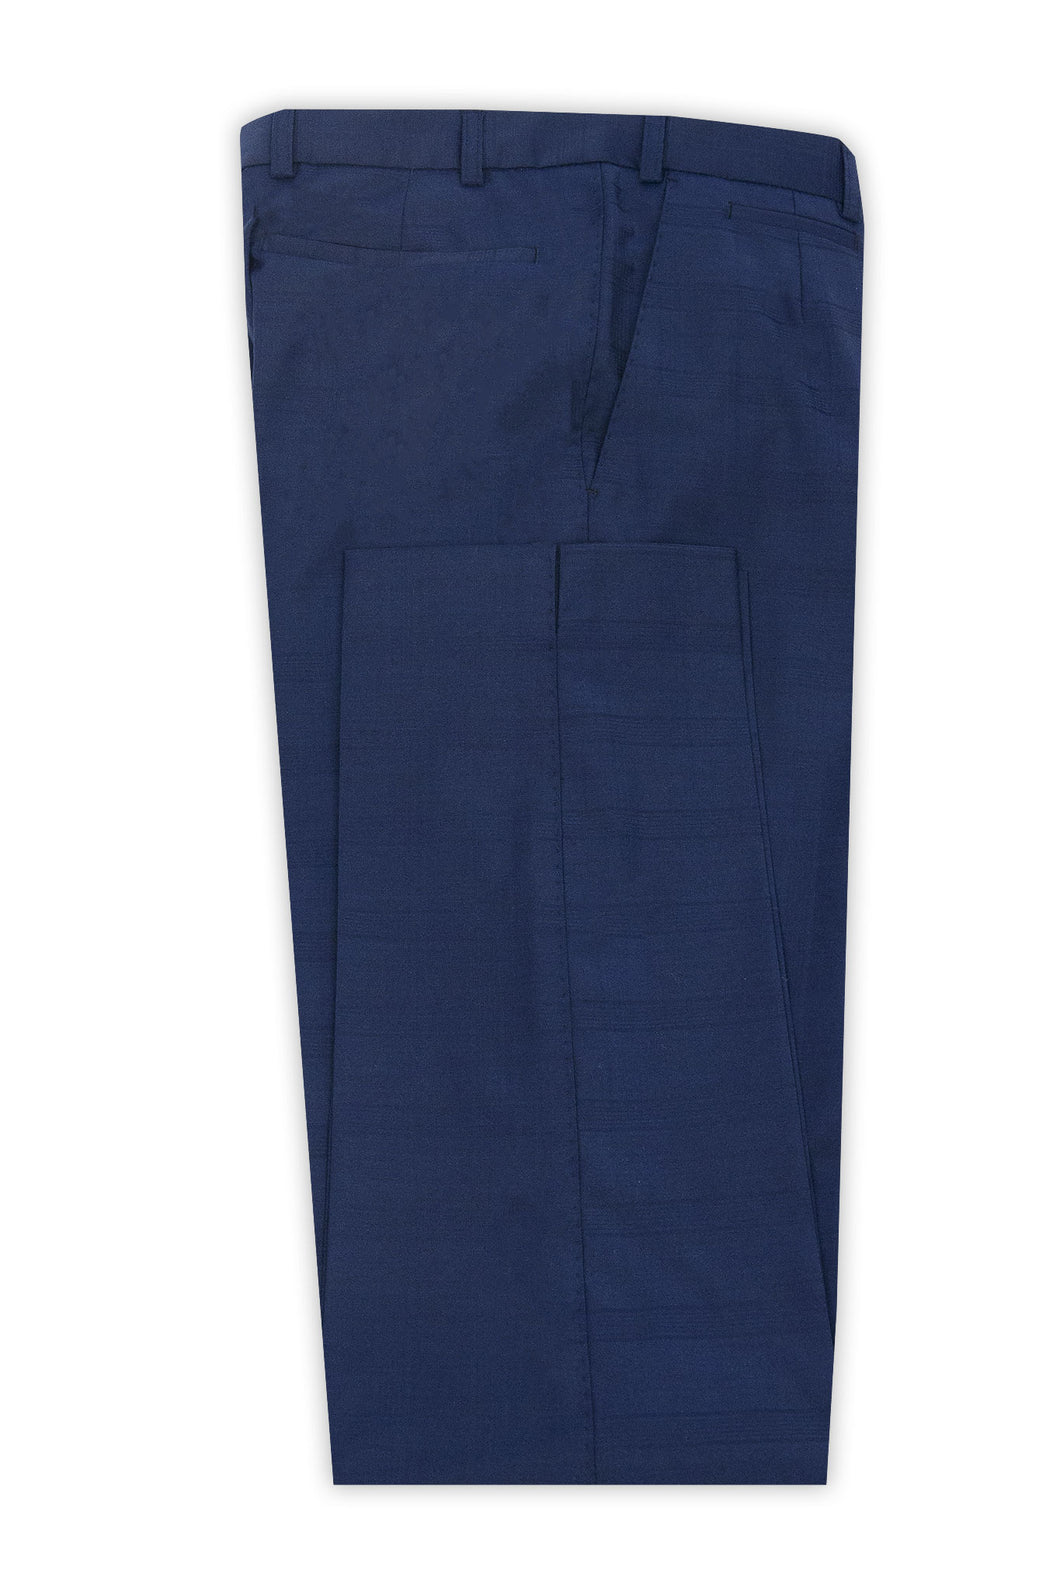 Navy Trousers with Subtle Grid Check Pattern